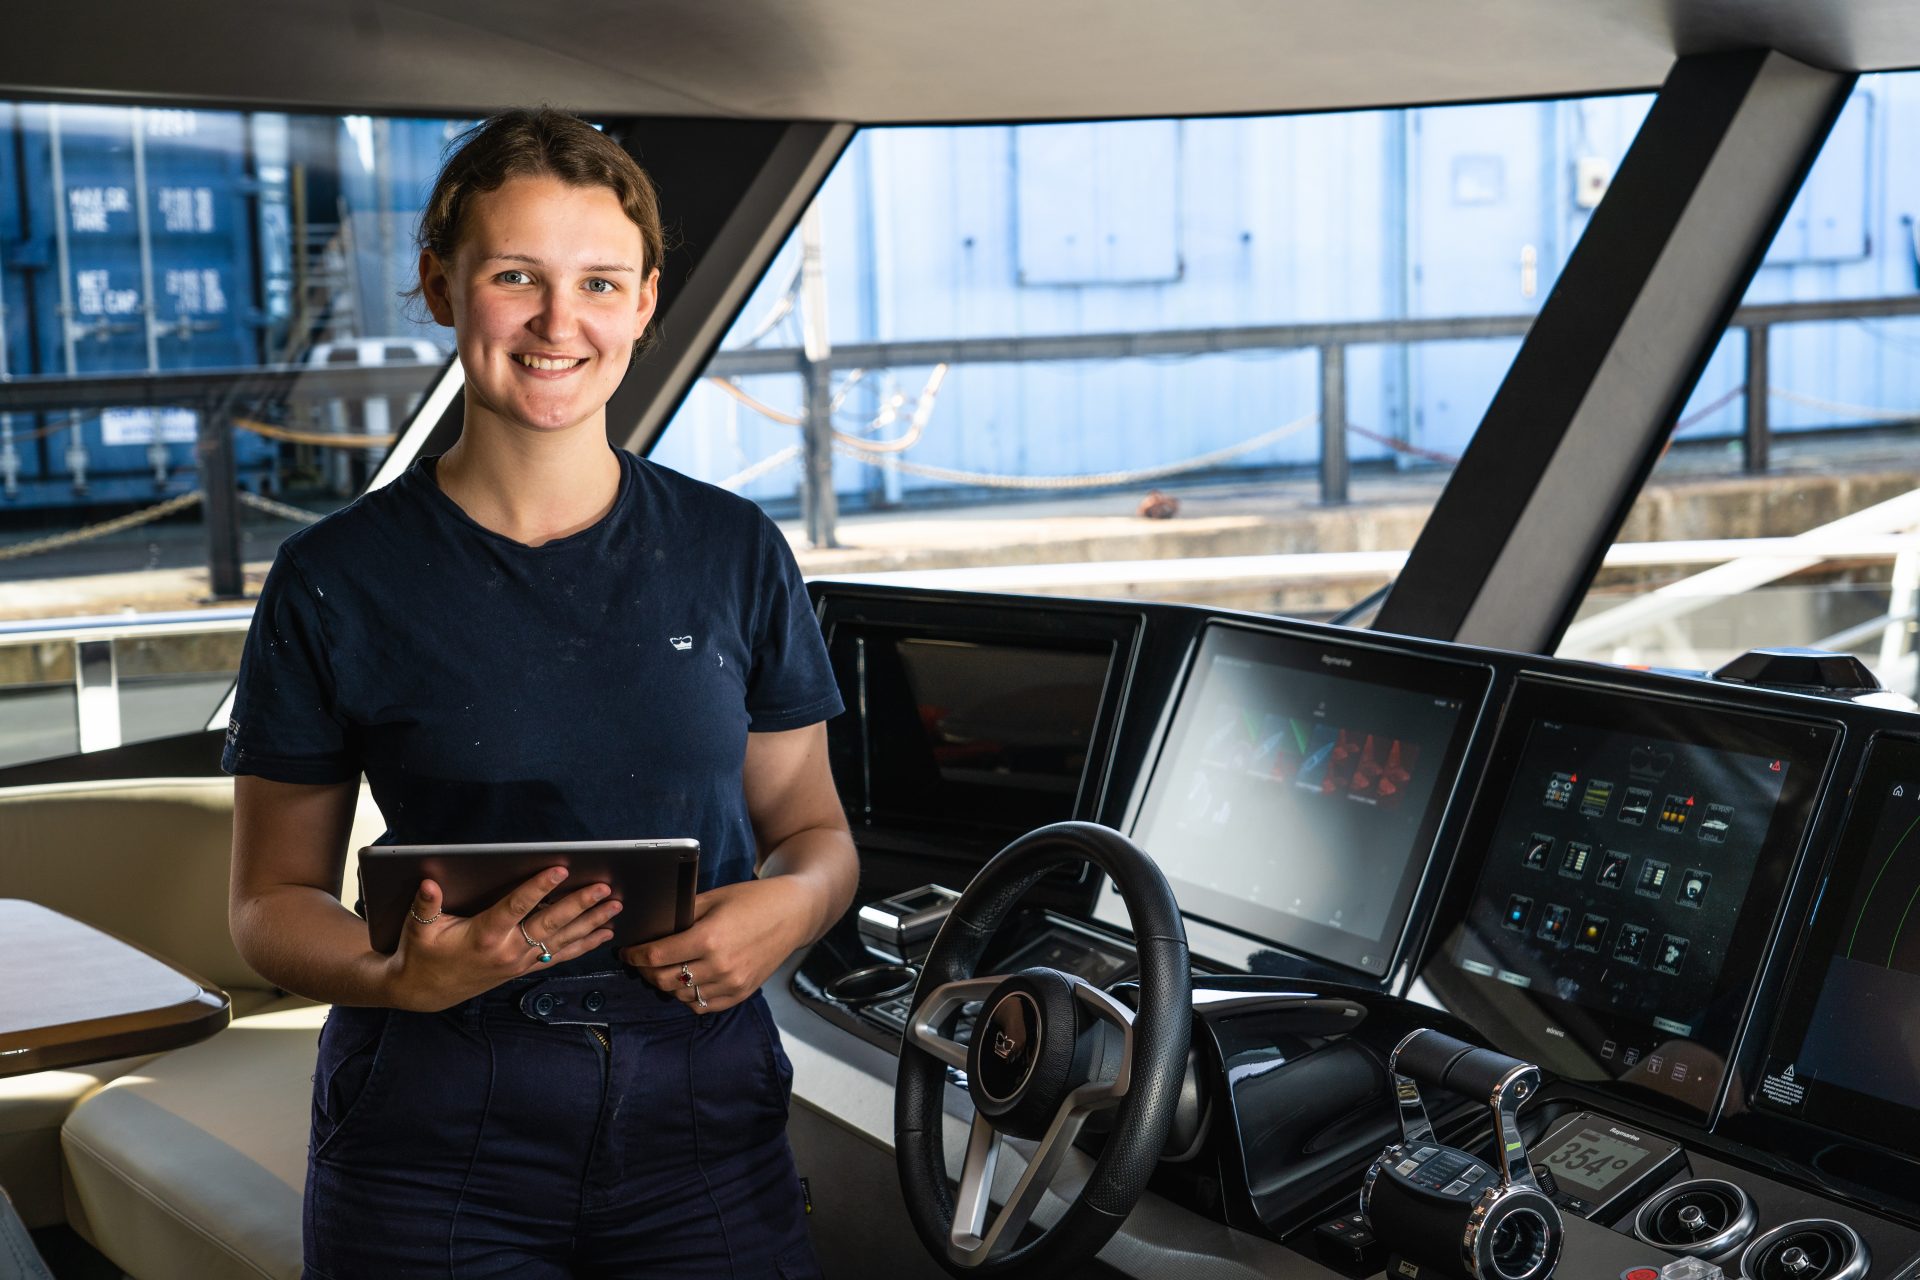 Princess Yachts apprentice in a yacht